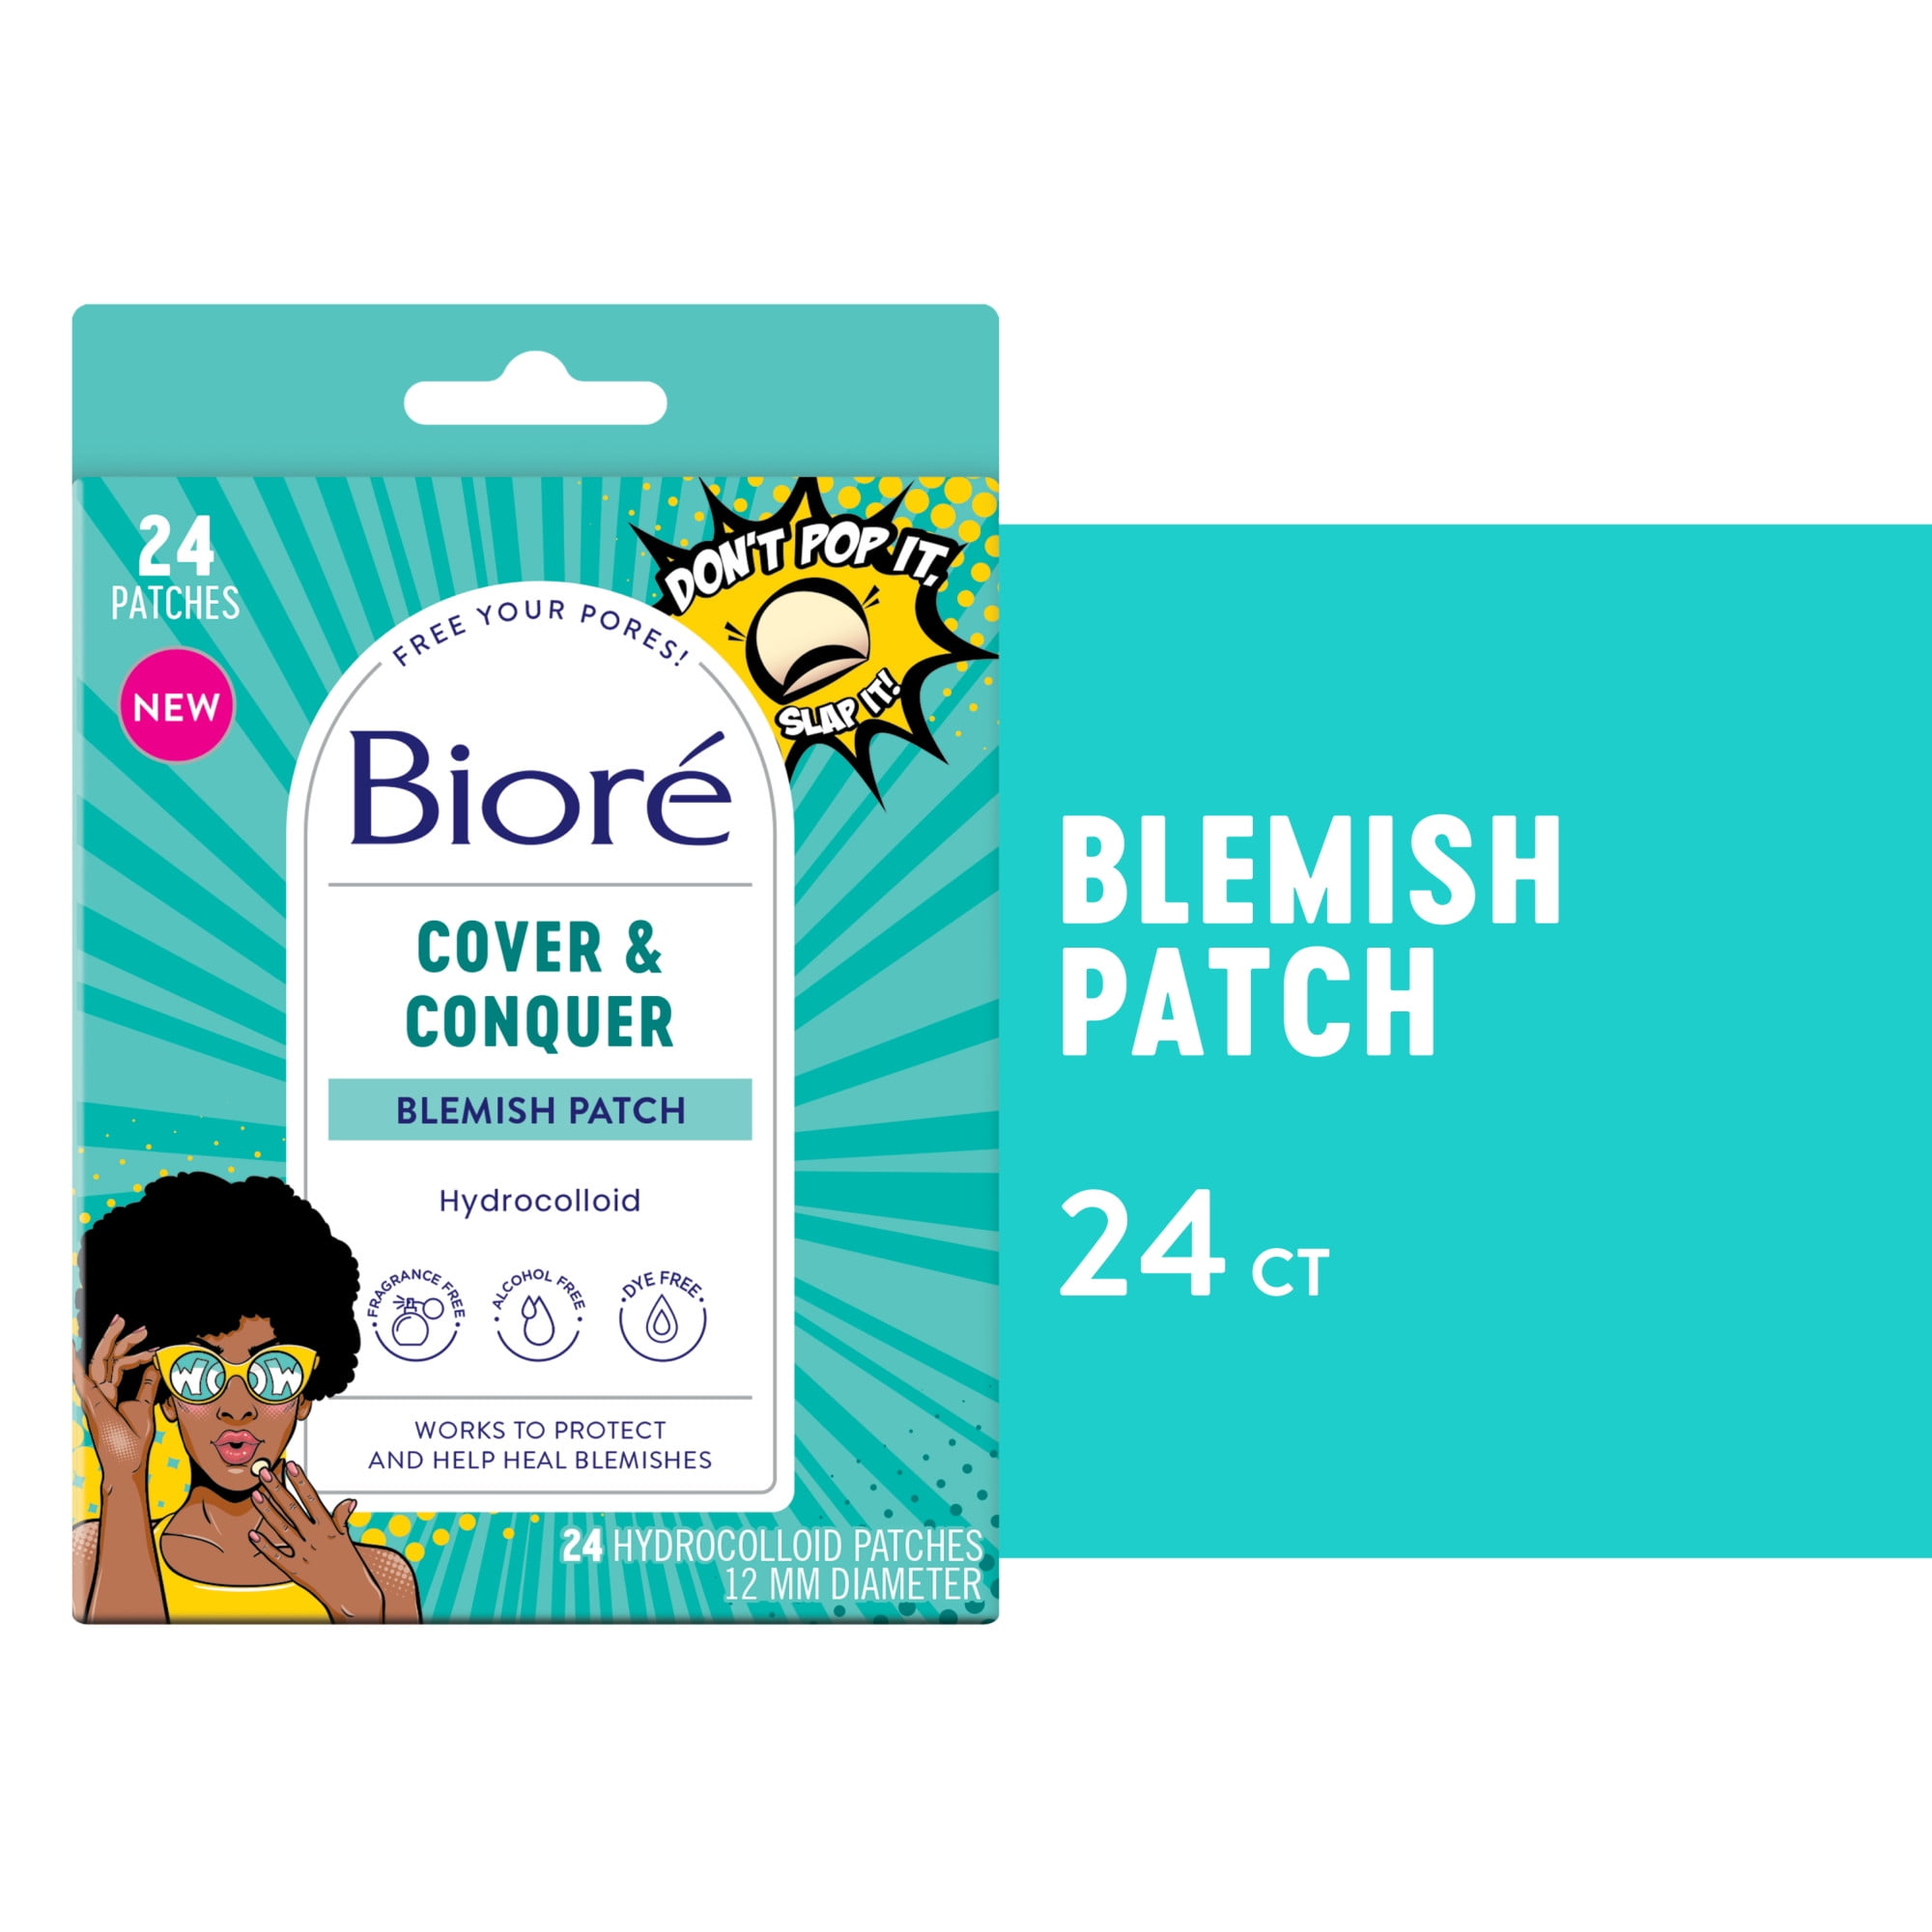 Biore Pimple Patch, Cover & Conquer Blemish Patch,Medical Grade Ultra-Thin Hydrocolloid Pimple Patch for Covering Zits and Blemishes, HSA/FSA Approved, 24 count